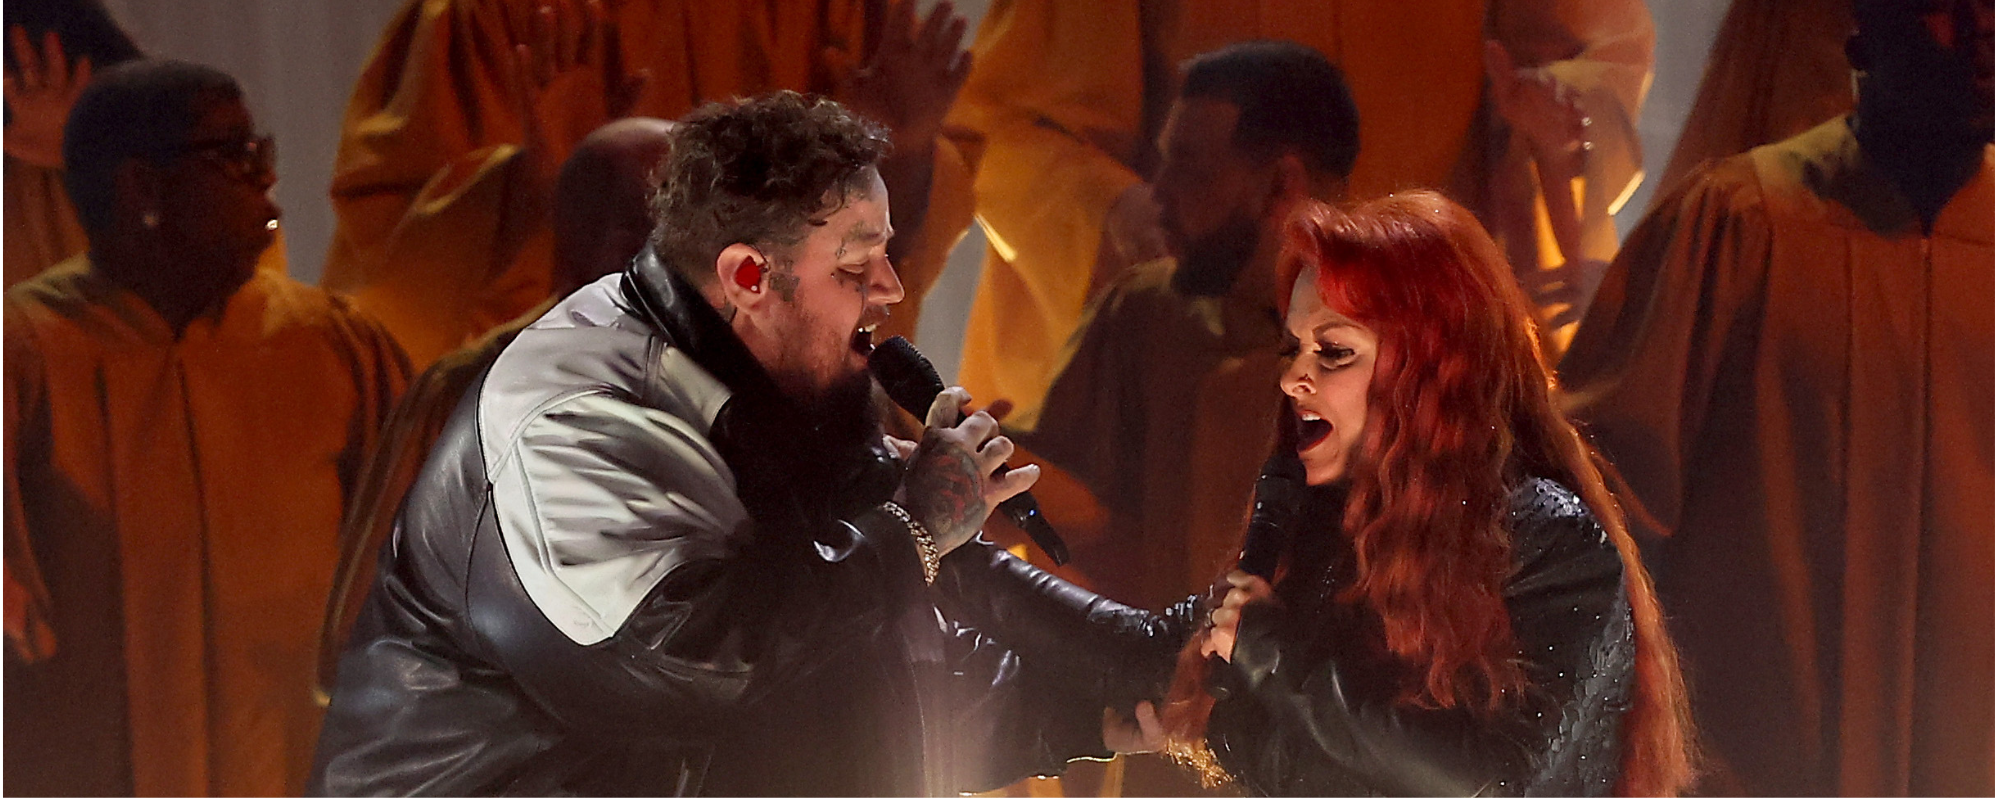 Watch: Jelly Roll and Wynonna Judd Open 2023 CMA Awards with a Bang